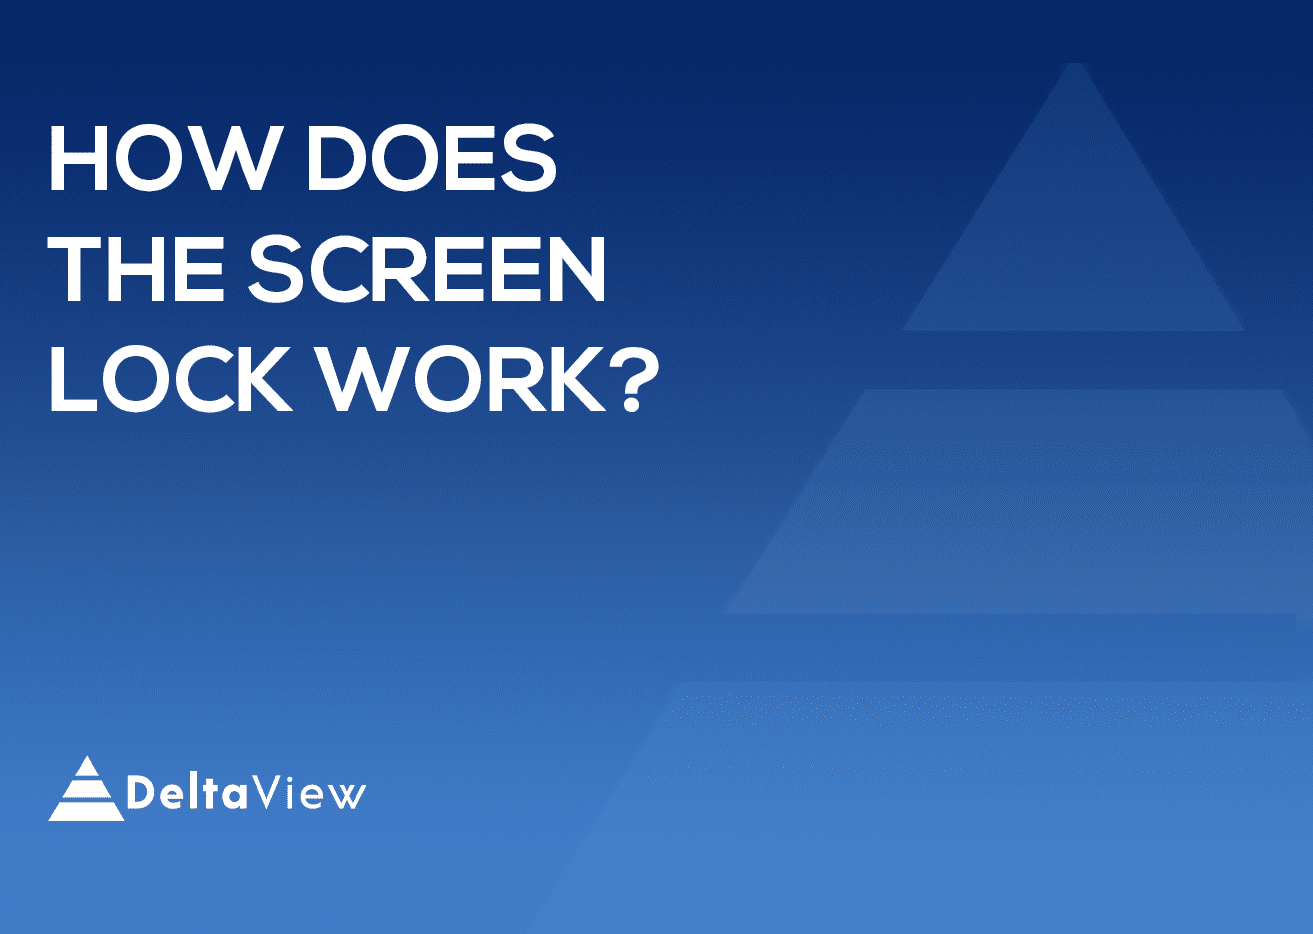 How does the screen lock work?